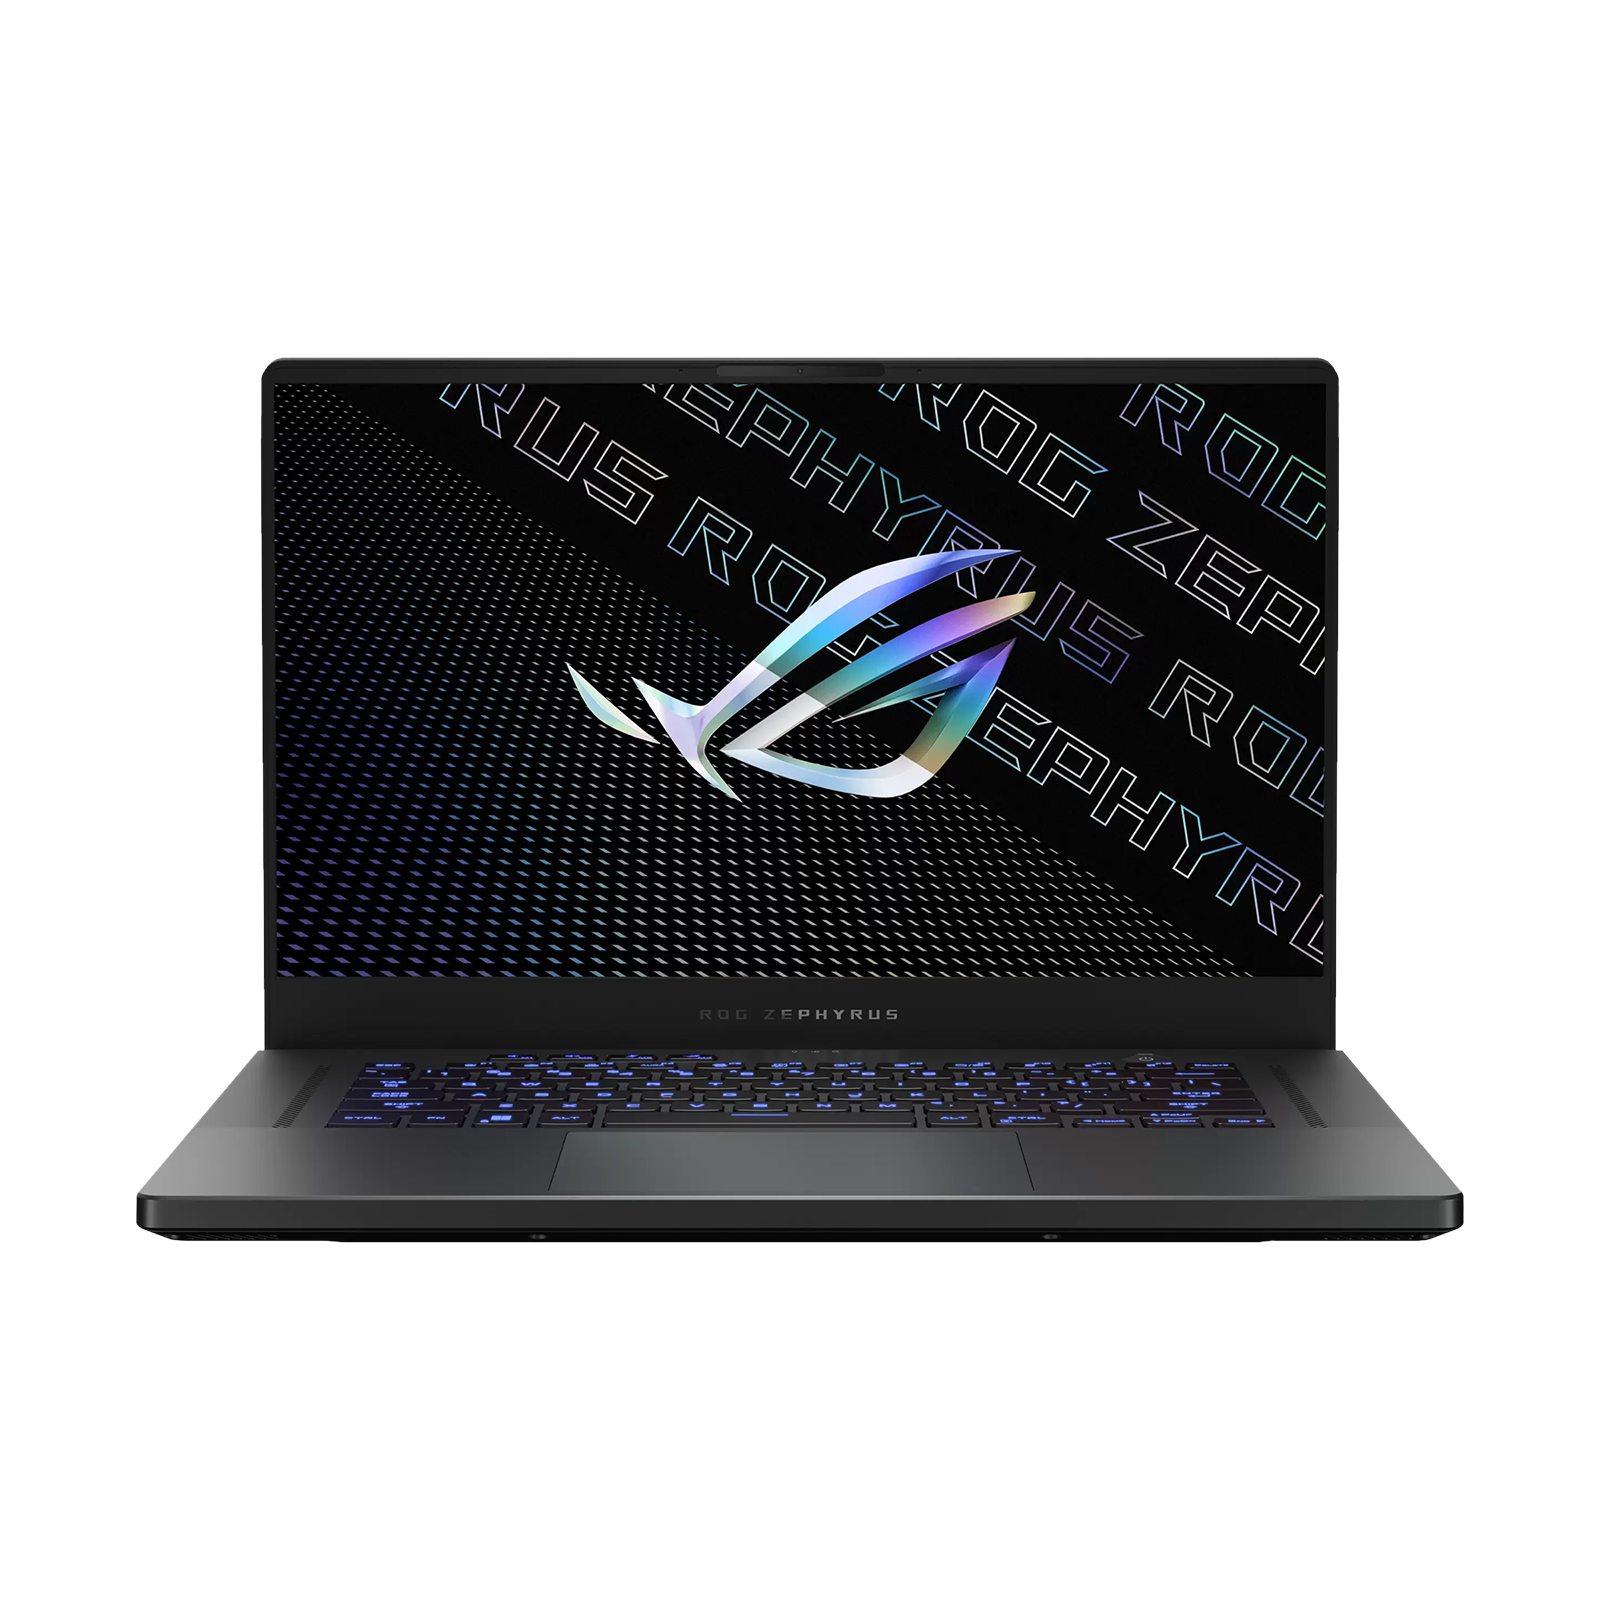 ASUS ROG Zephyrus G15 AMD Ryzen 9 Laptop (16GB, 1TB SSD, Windows 11 Home, 12GB GDDR6, 15.6 inch WQHD IPS Display, MS Office Home And Student, Eclipse Gray, 2.5Kg)